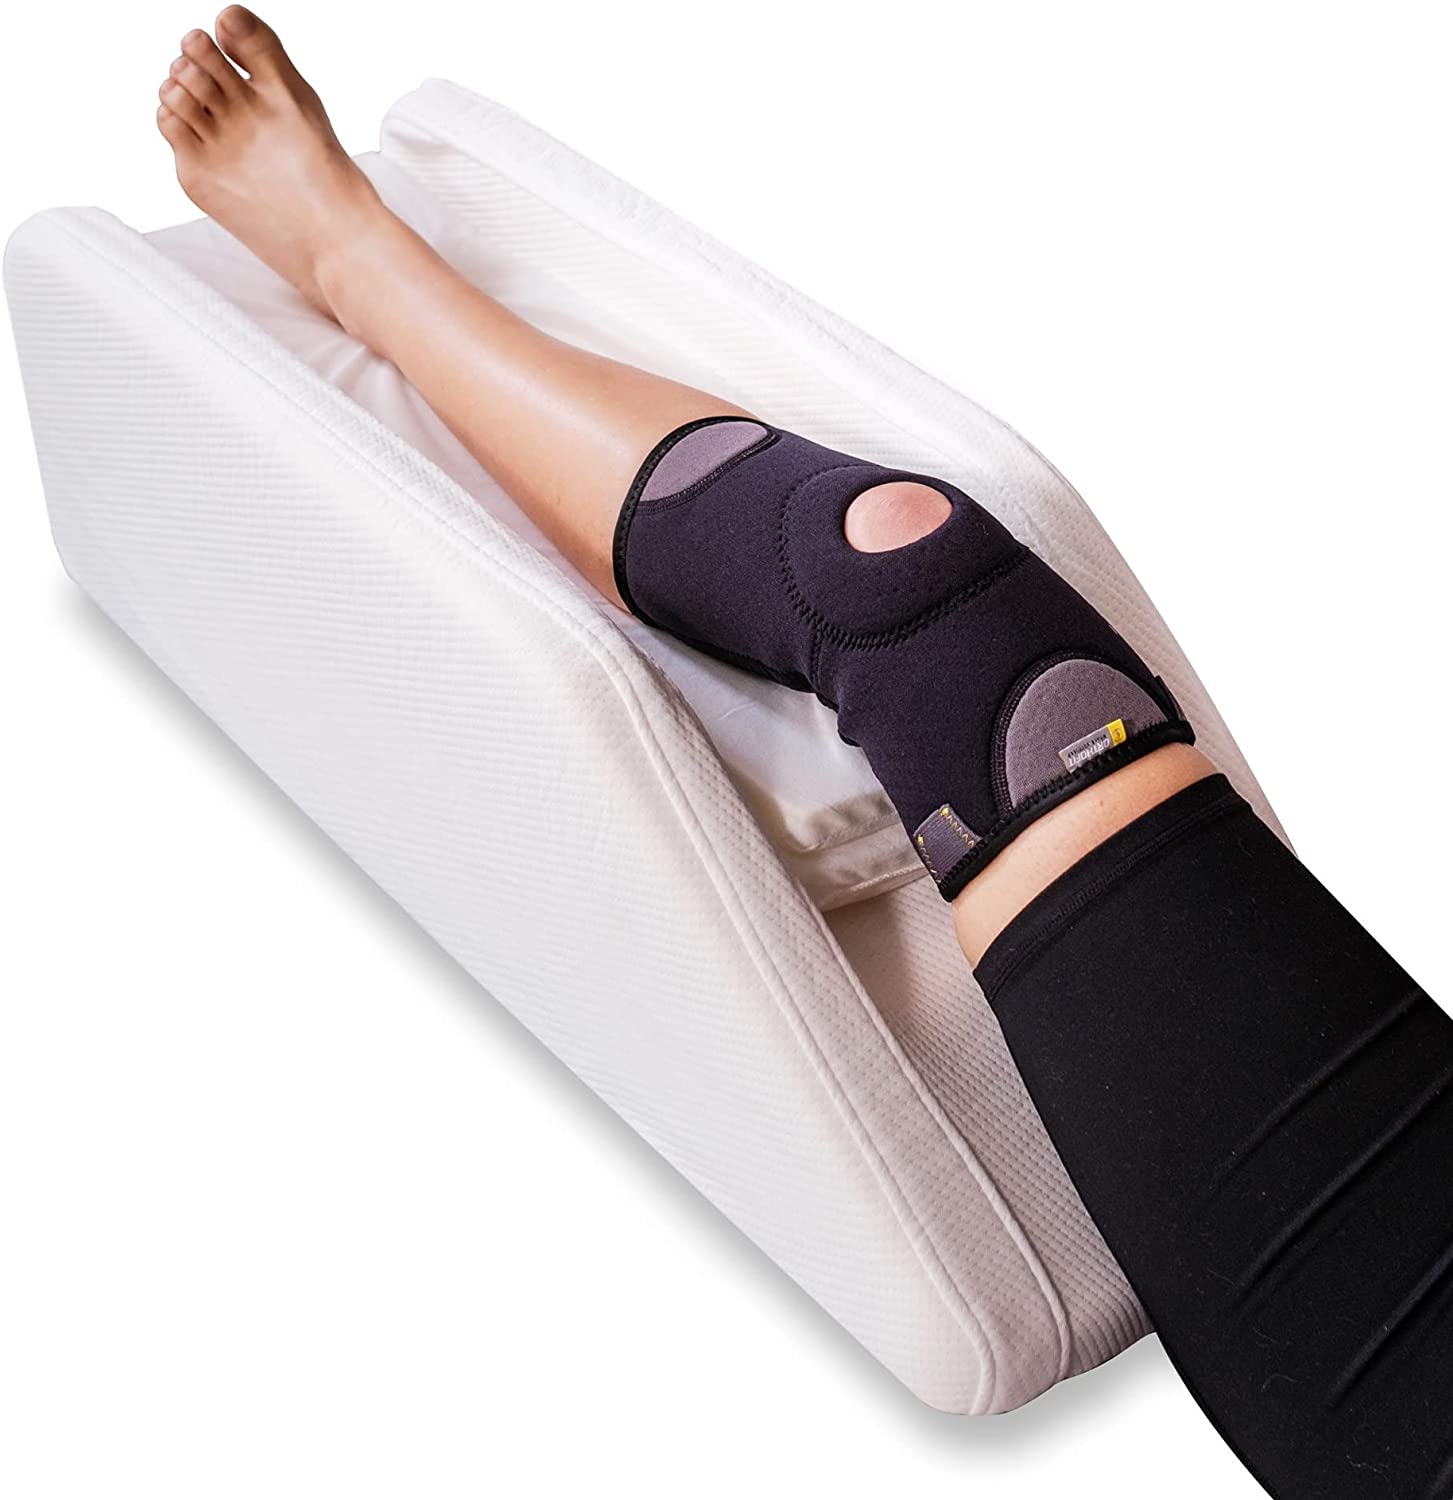 Airensky 3-Height Adjustable Leg Elevation Pillow for After